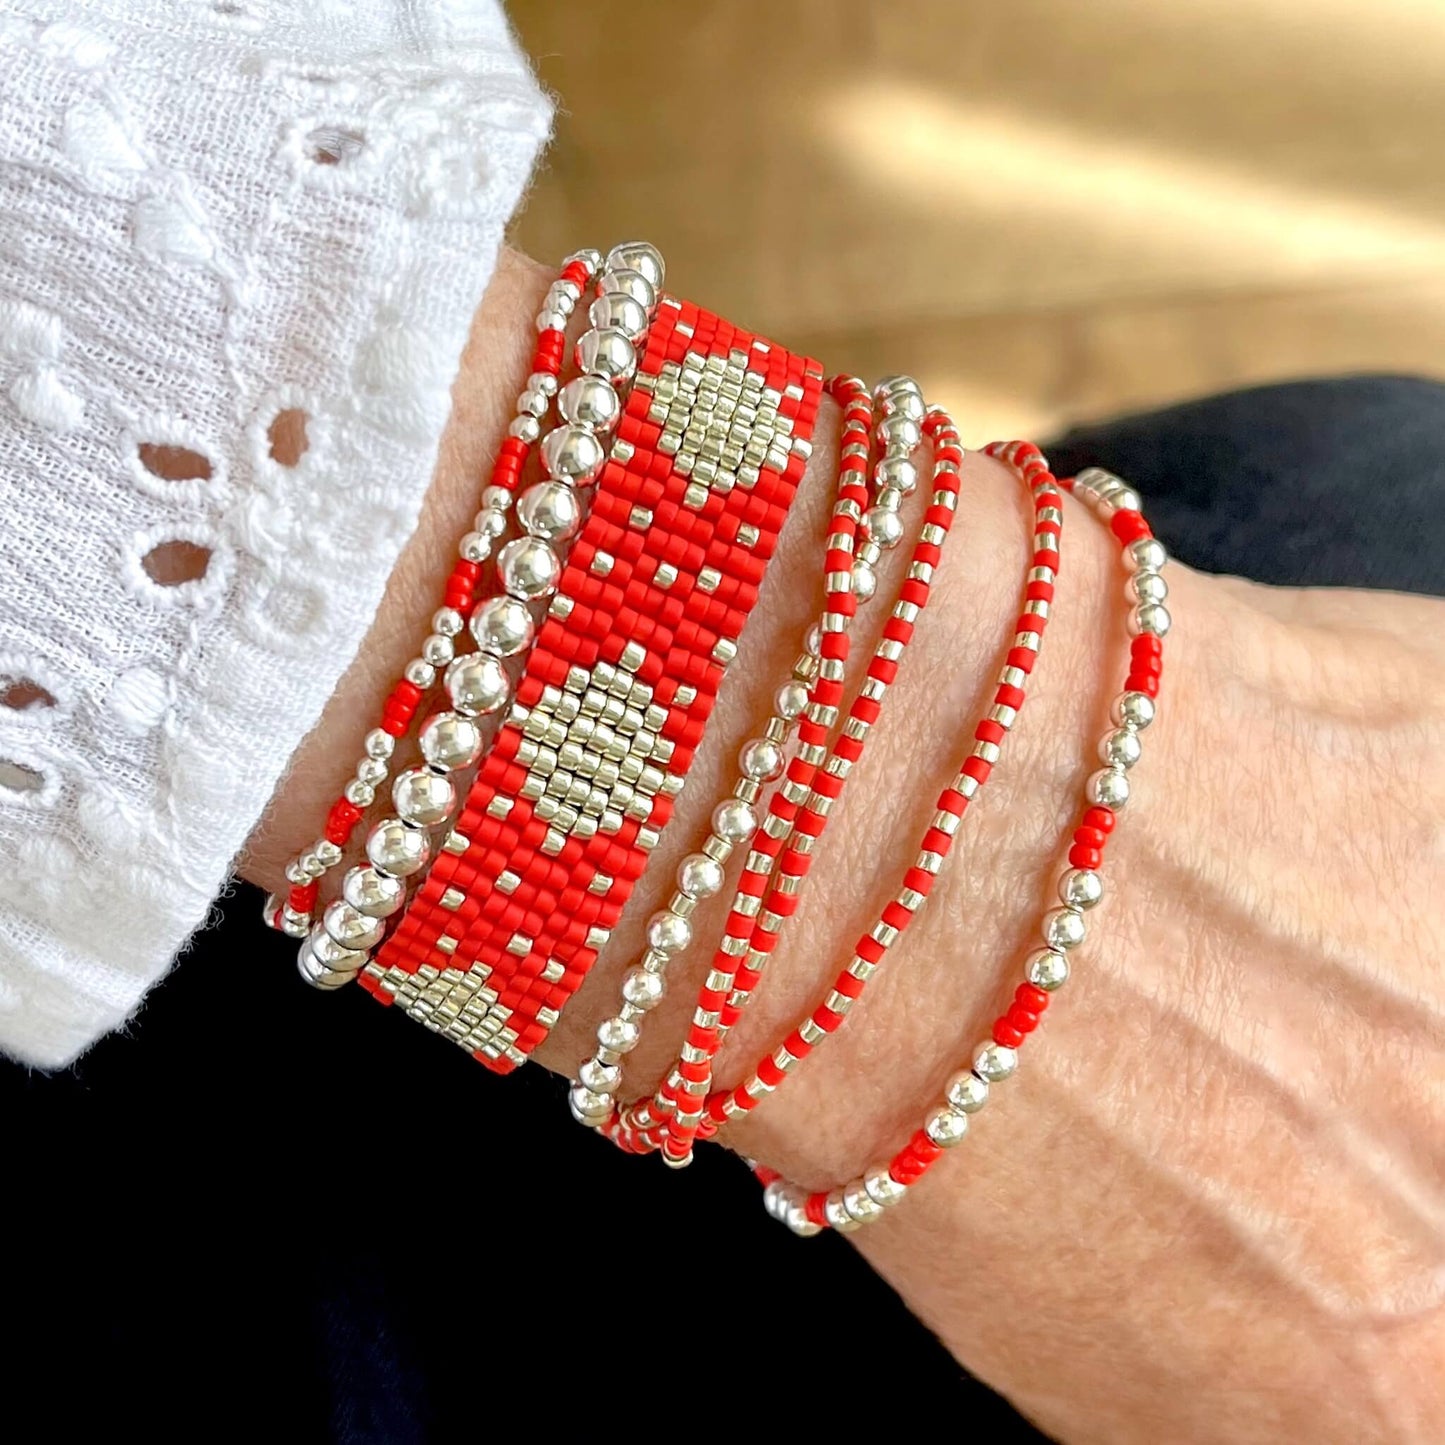 Red bracelets in a stack with a seed bead handwoven cuff and wrap, and sterling silver stretch bracelets.